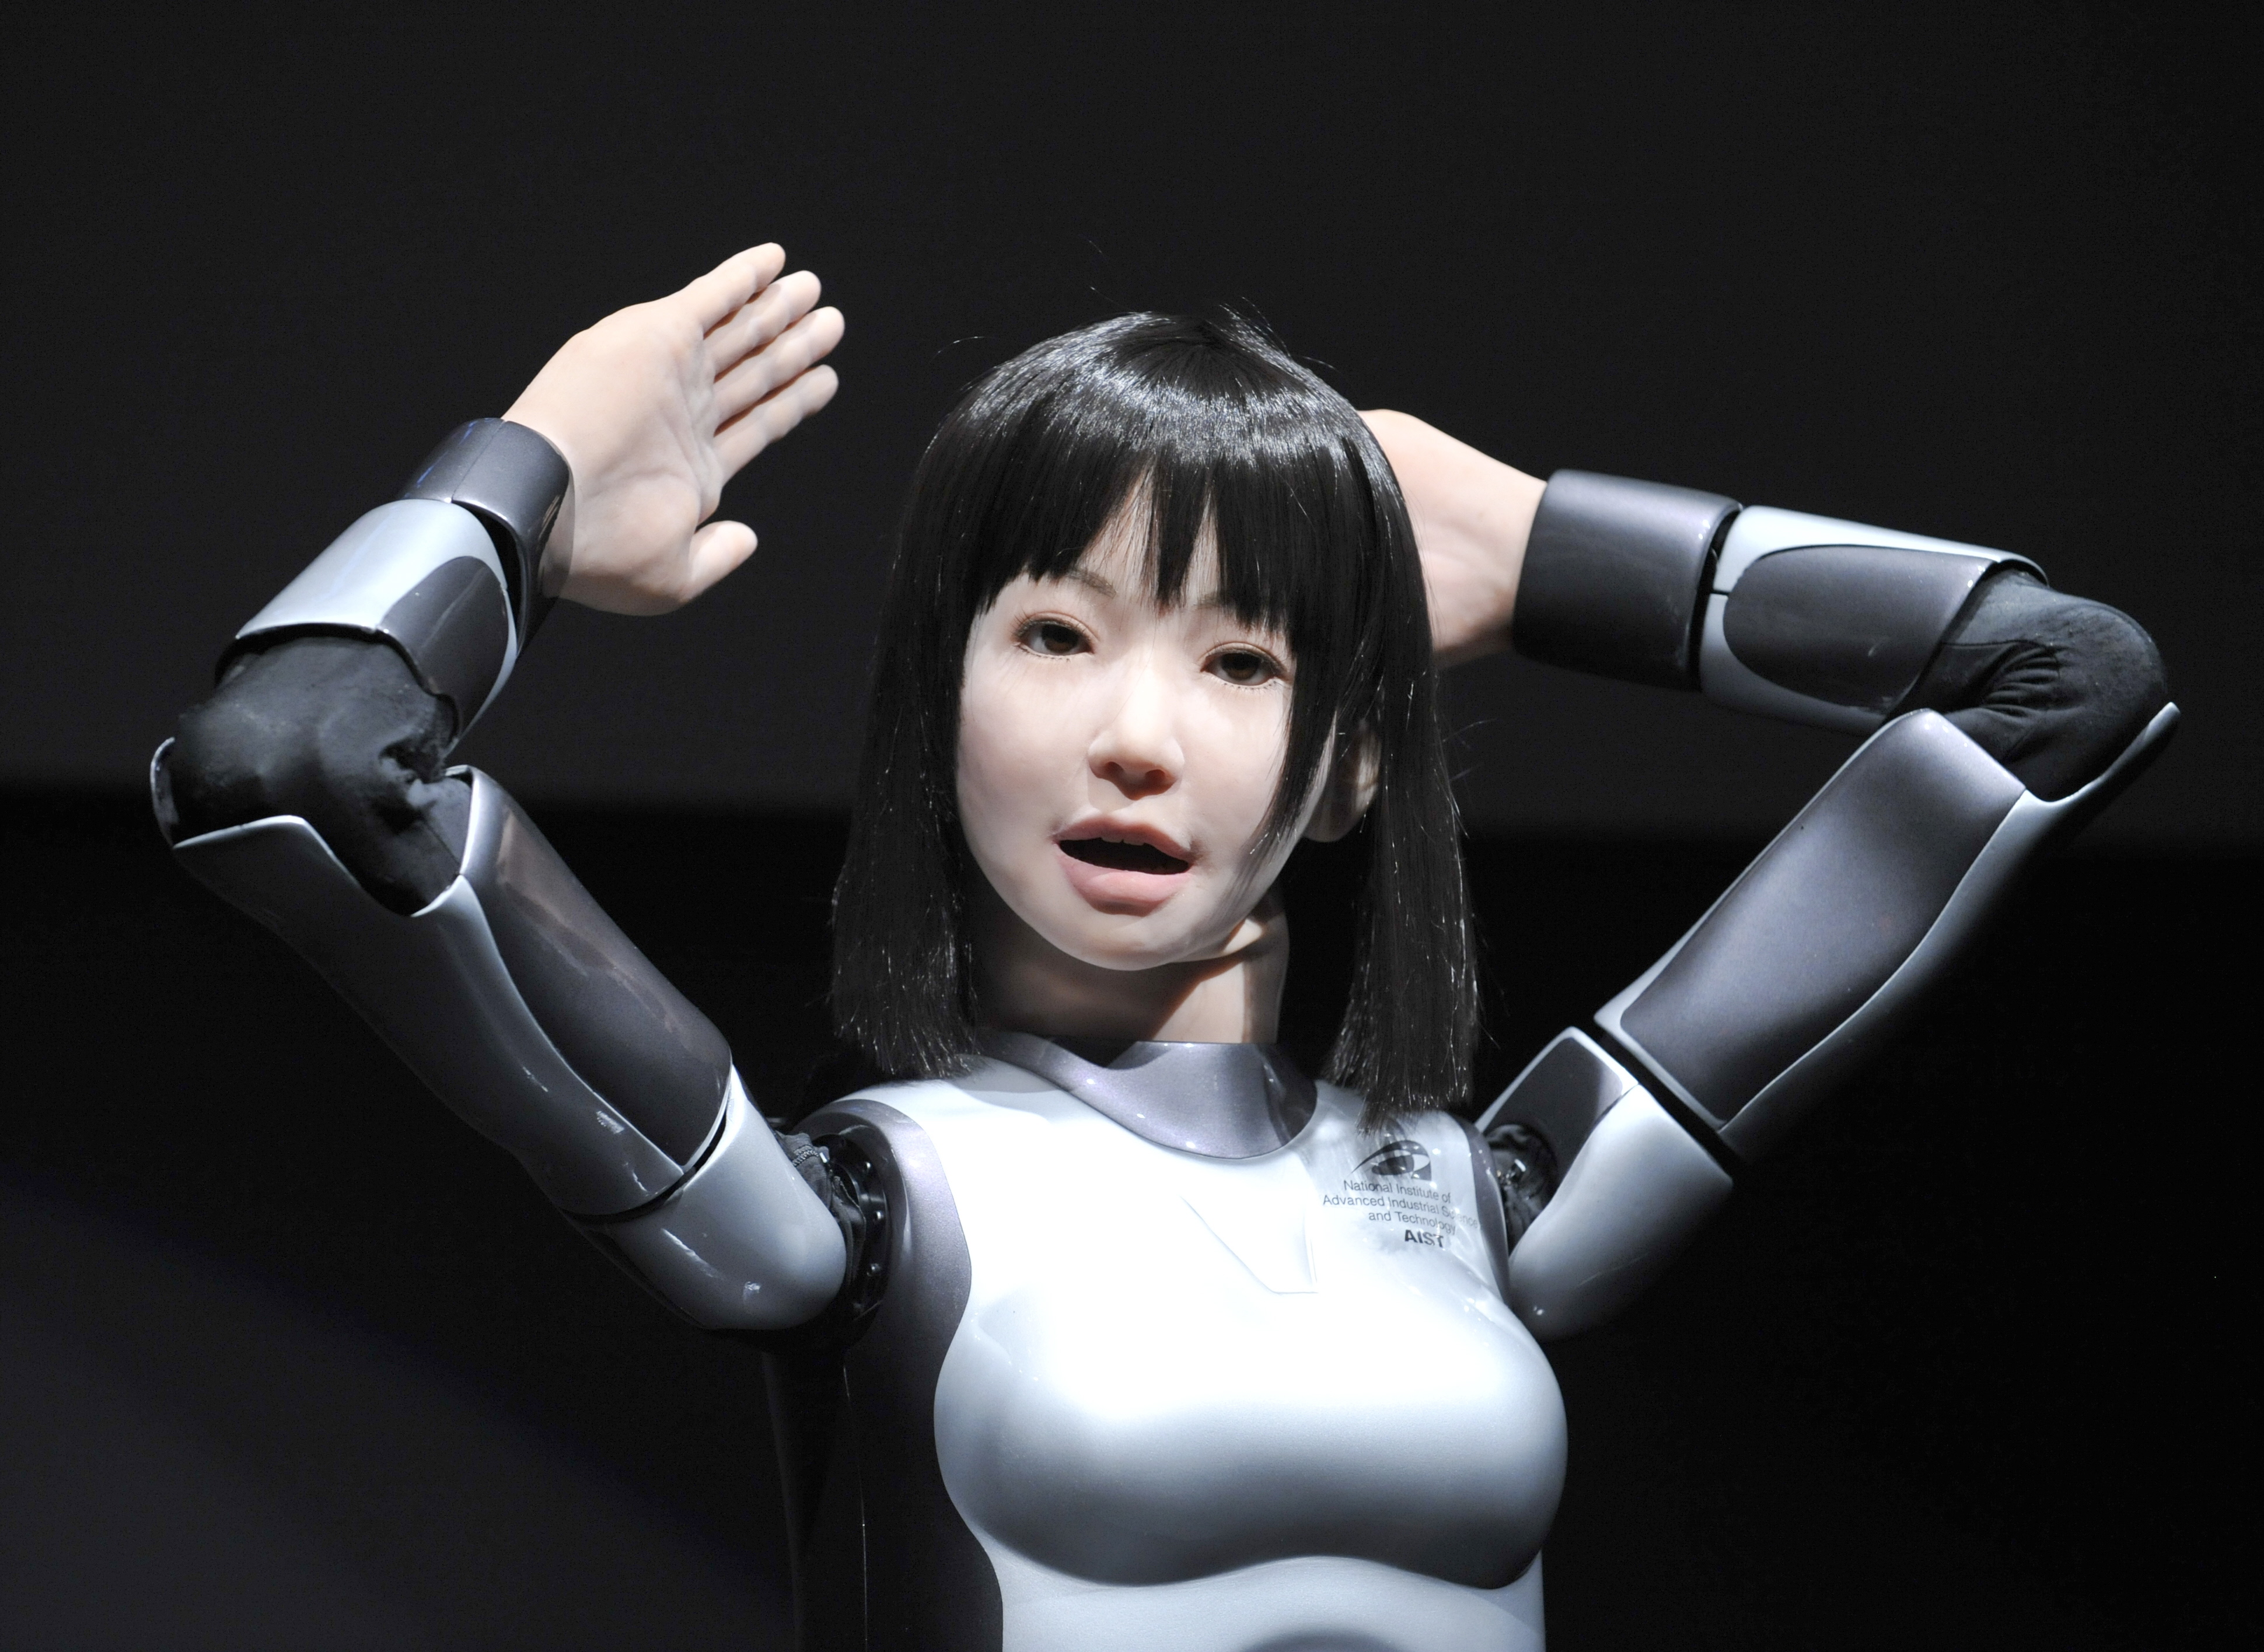 A humanoid robot, HRP-4C, developed by Japan's Advanced Industrial Science and Technology shows off her skills during the Digital Contents Expo in Tokyo on October 22, 2009.